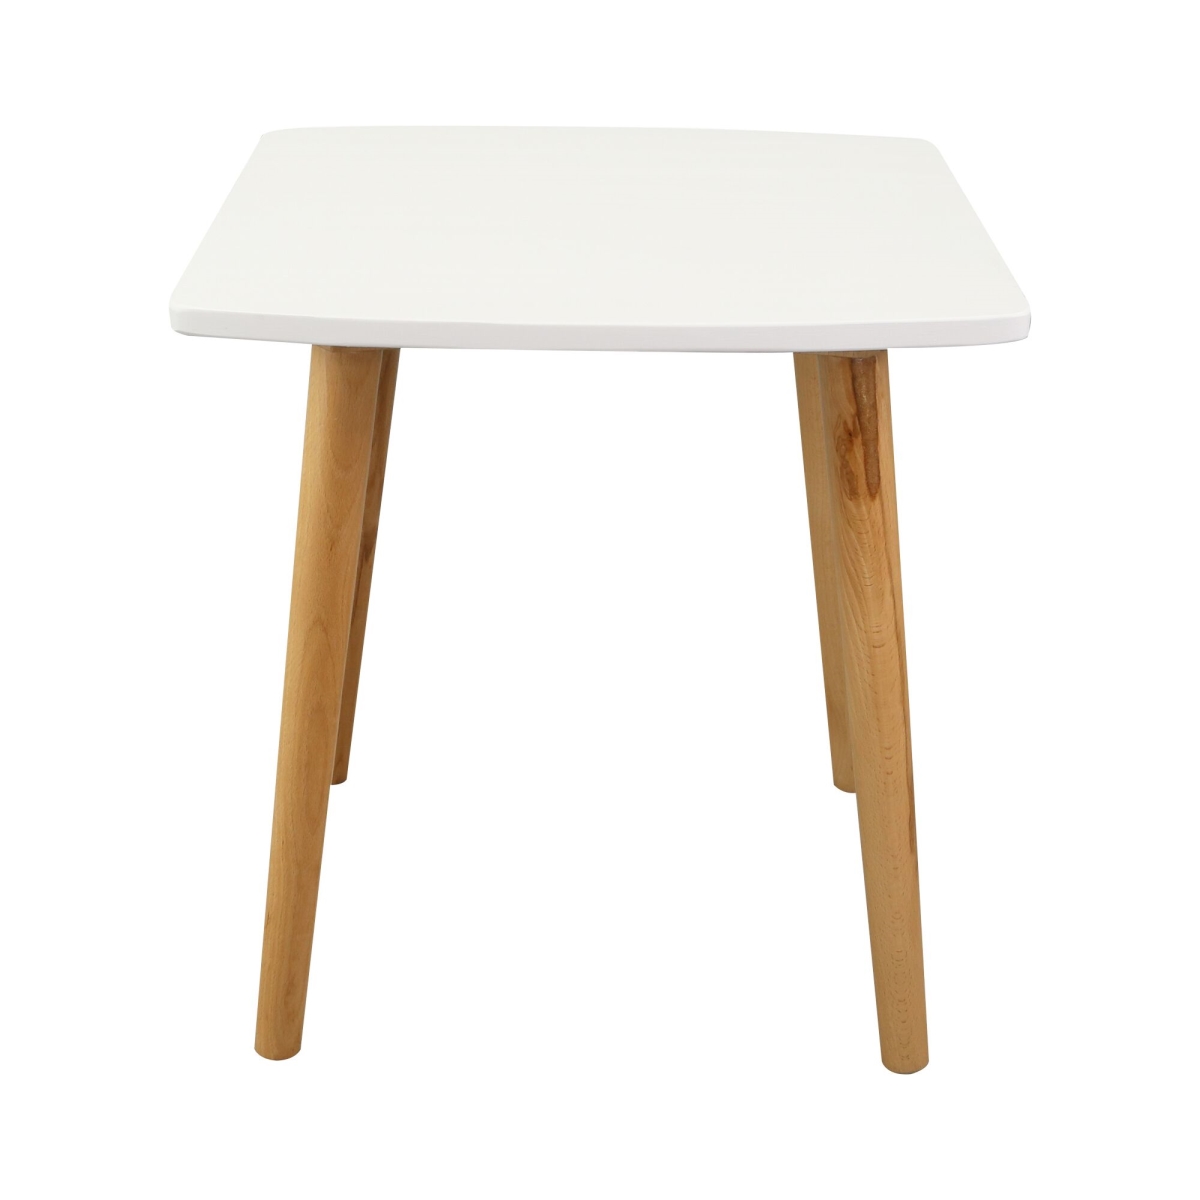 563-11 Ezly Mid-century Style Wooden End Table - White & Natural